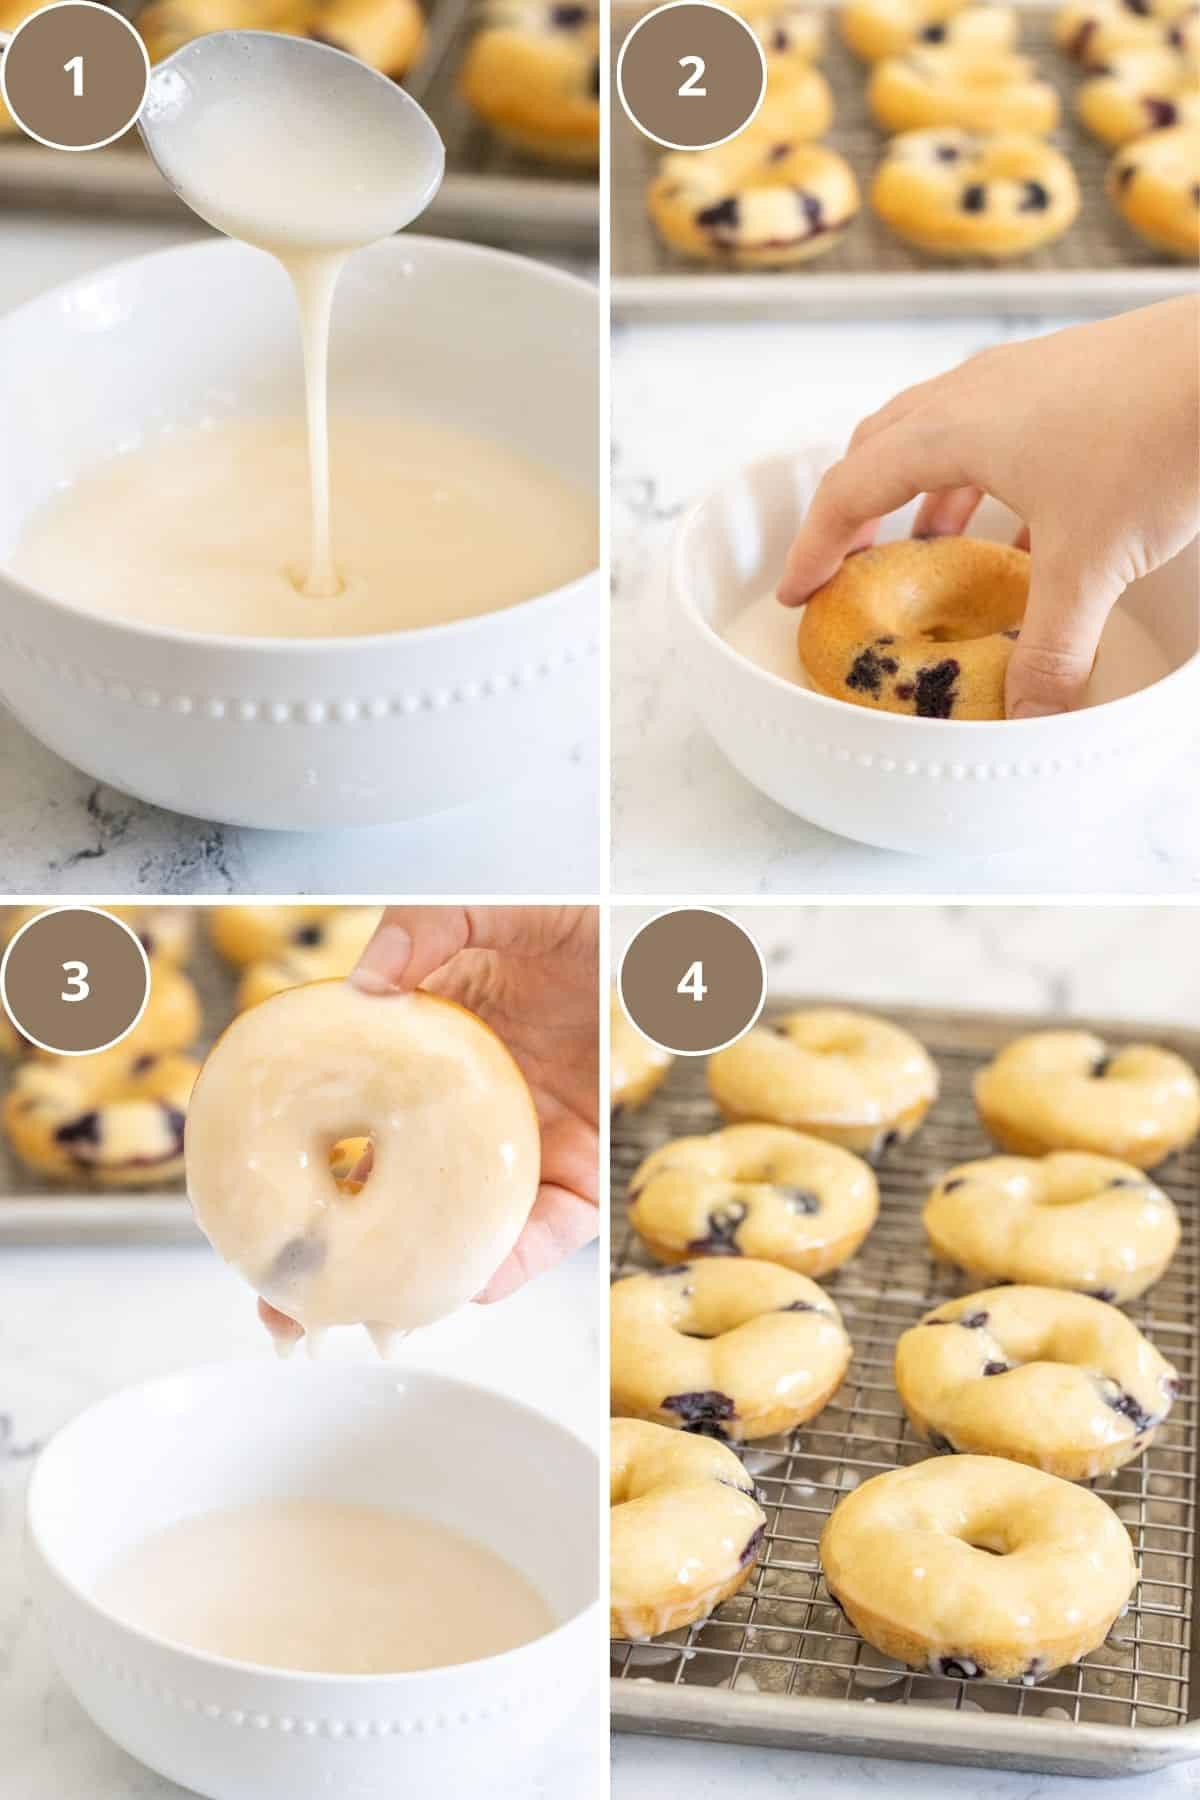 A four part grid showing the consistency of the glaze pouring off a spoon, then a blueberry donut being dunked in the glaze, then the donut over the bowl with glaze dripping off, and finally the glazed donuts on a cooling rack.